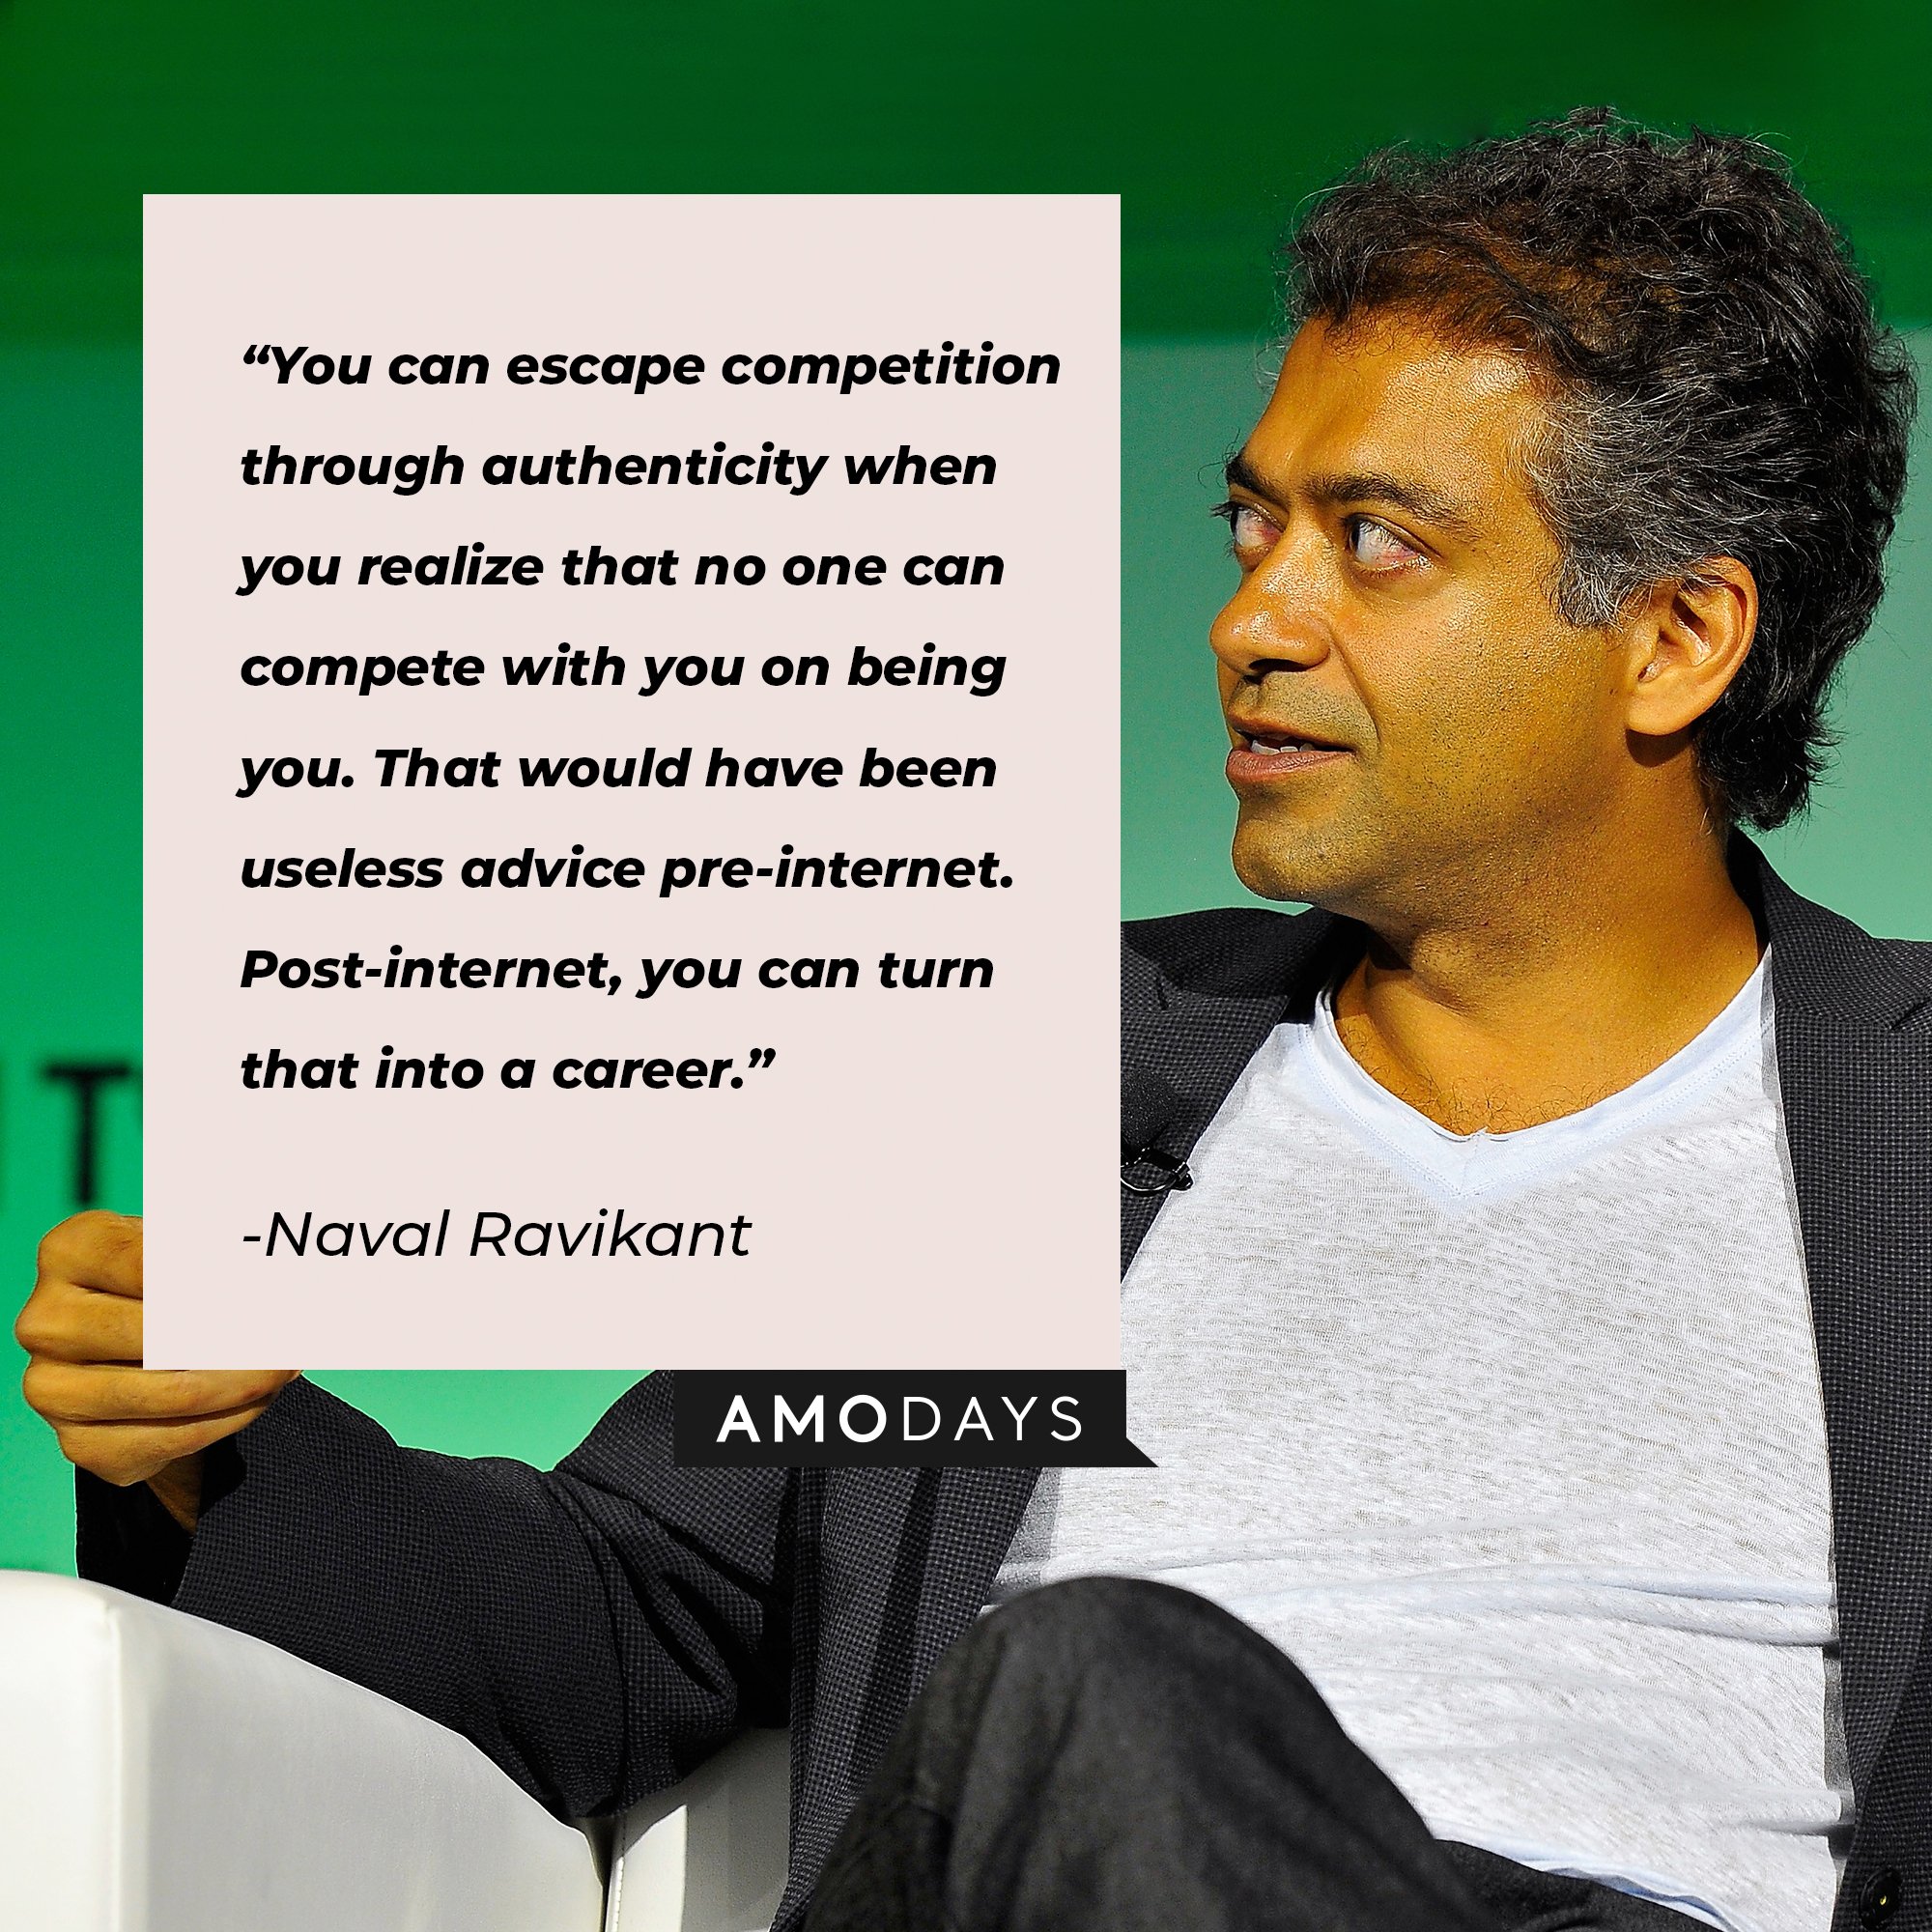 Naval Ravikant's quote:  “You can escape competition through authenticity when you realize that no one can compete with you on being you. That would have been useless advice pre-internet. Post-internet, you can turn that into a career.” I Image: AmoDays